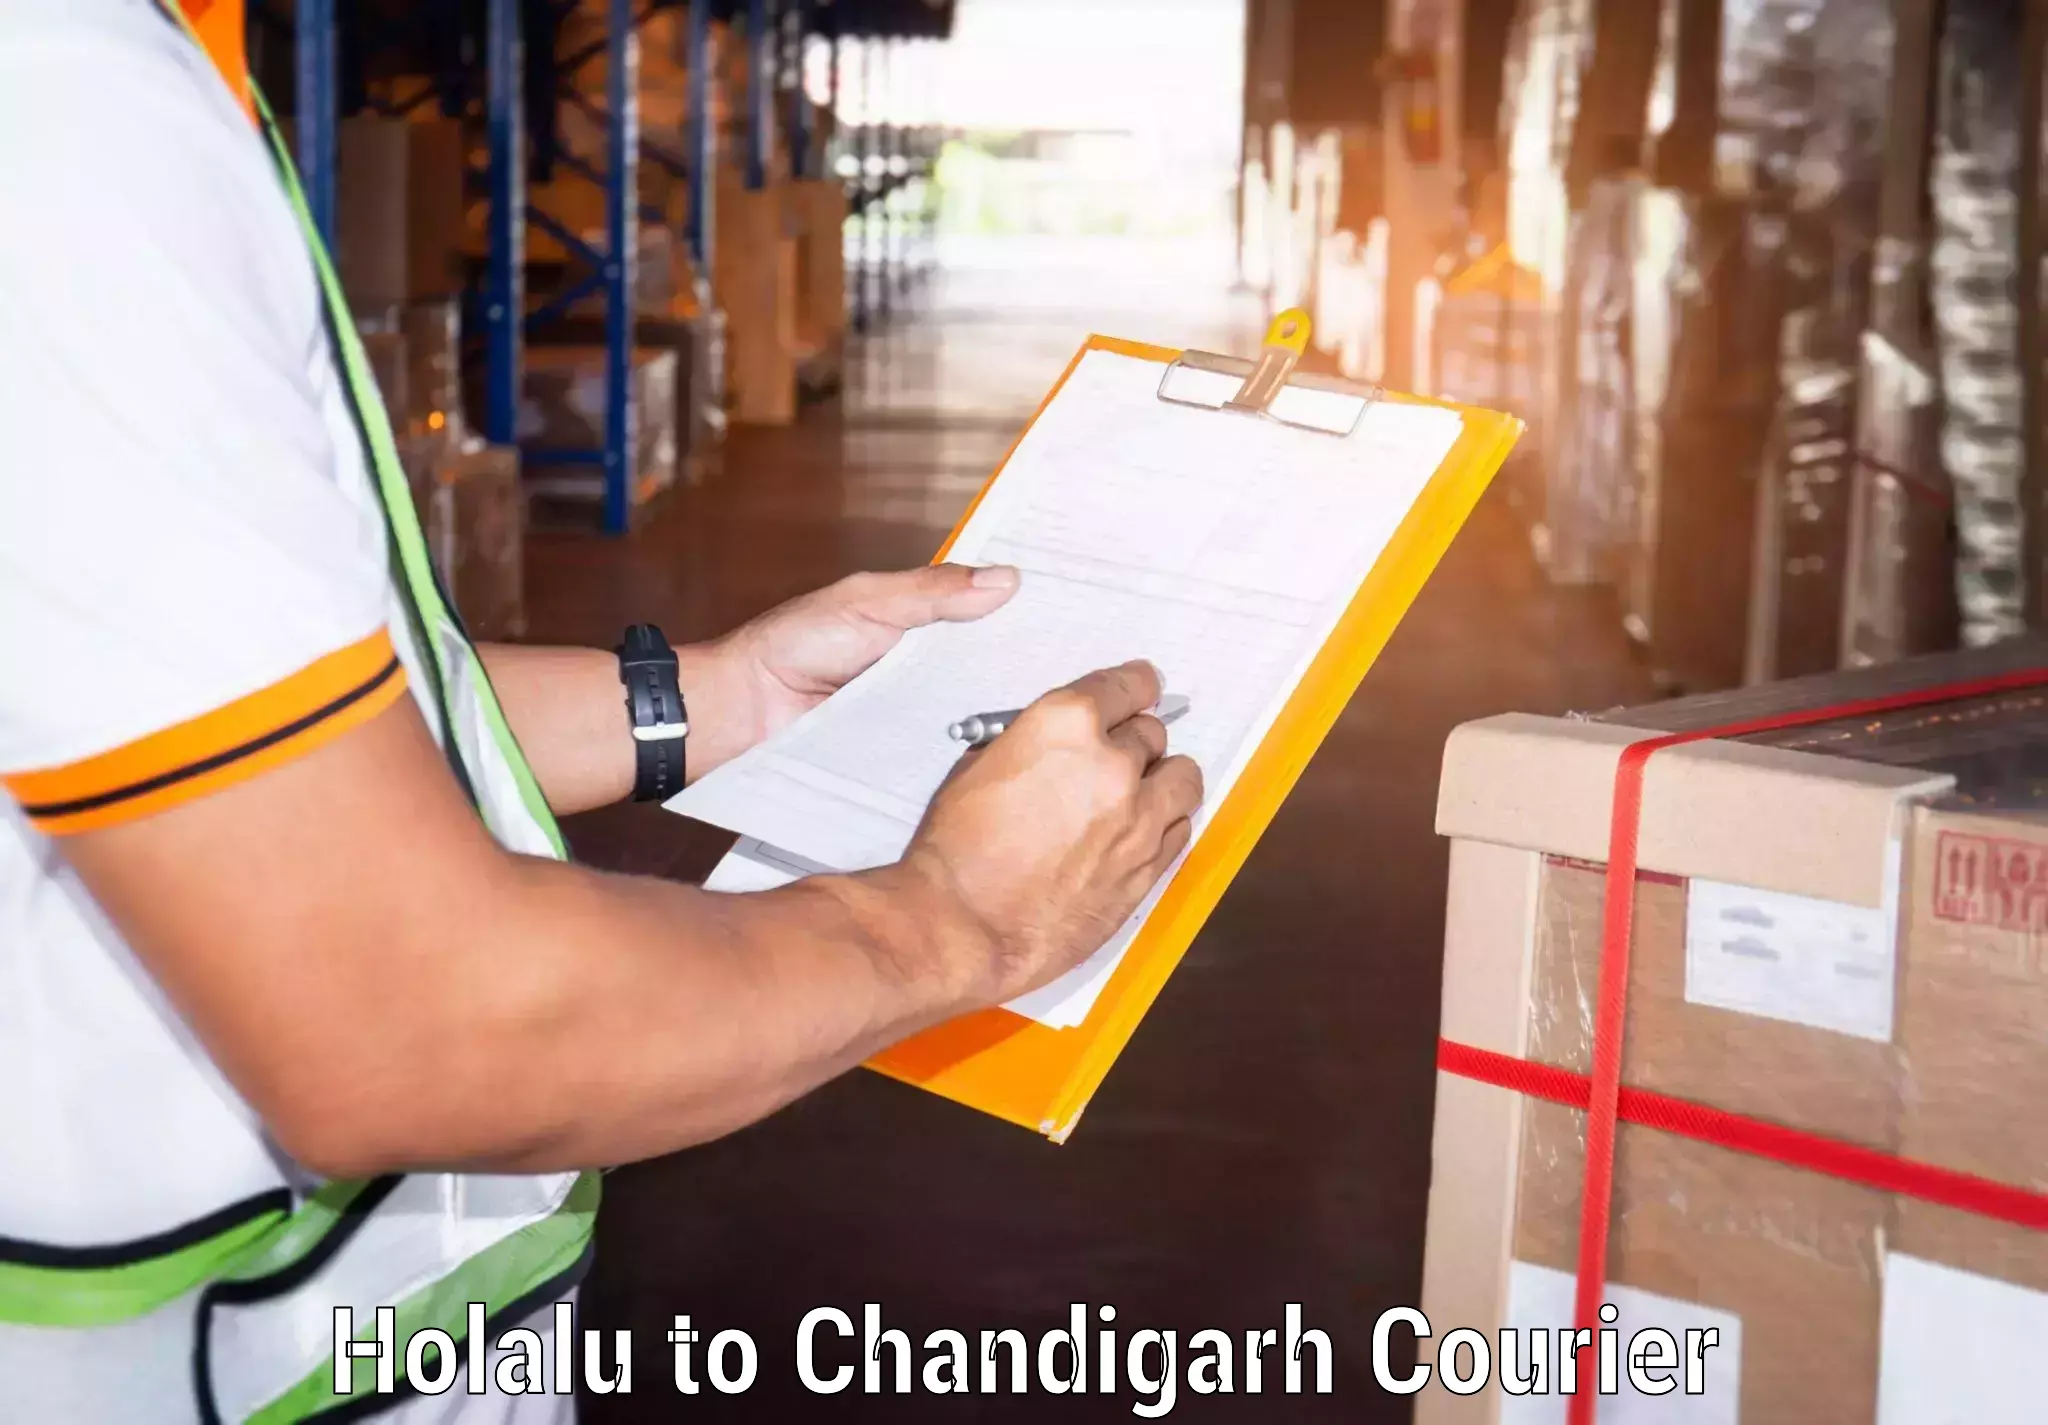 High-speed logistics services Holalu to Chandigarh